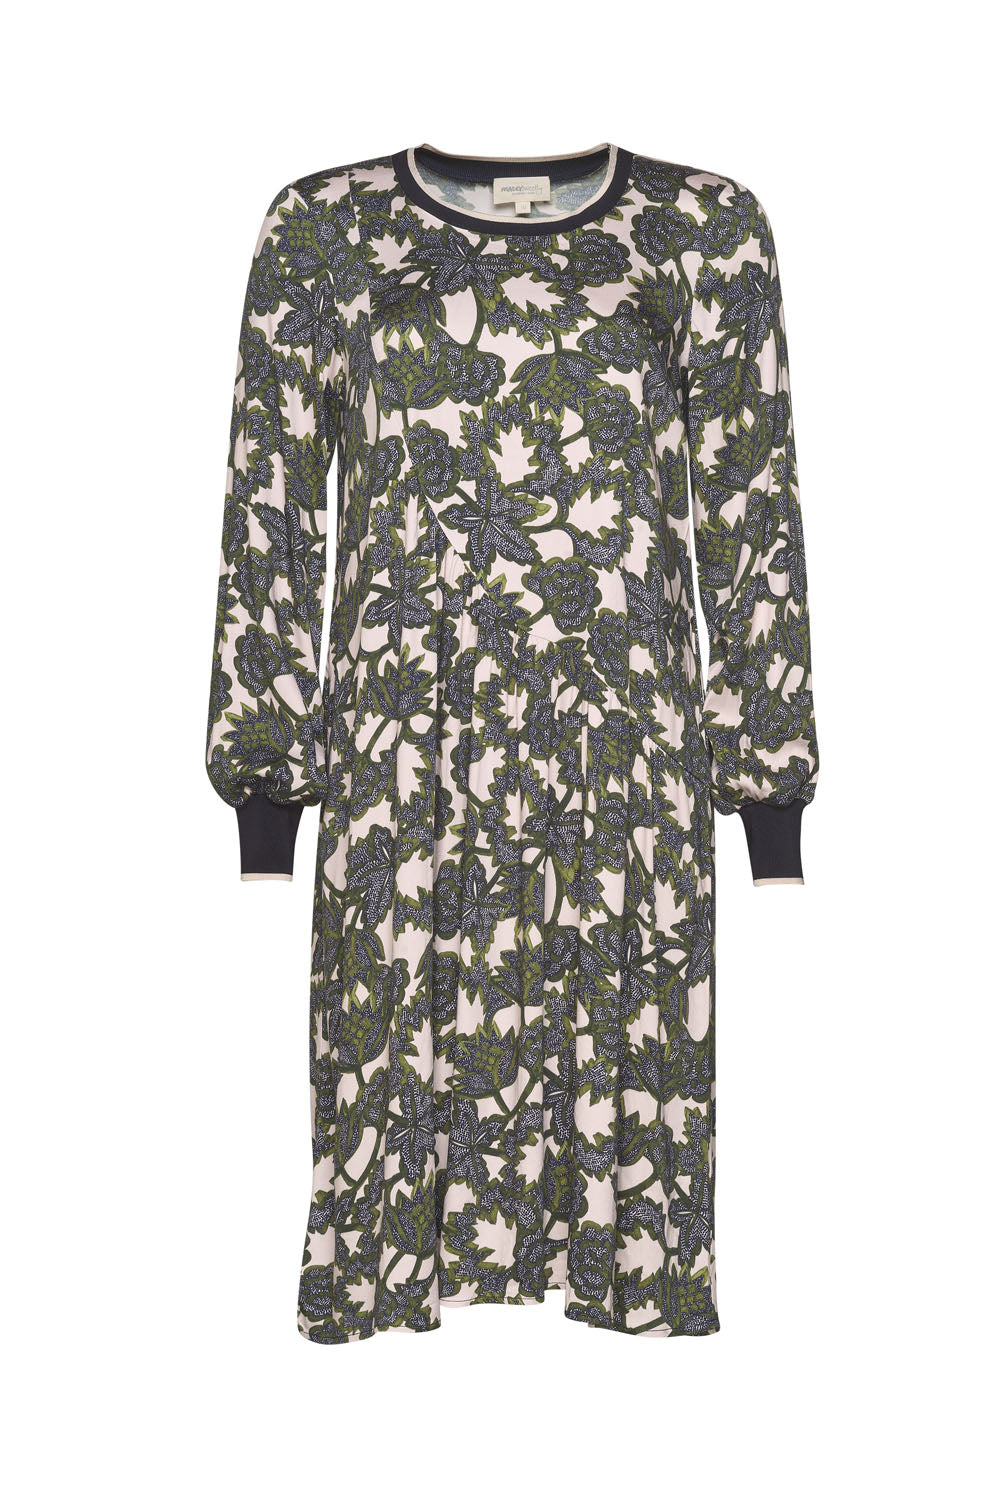 MADLY SWEETLY HEMPSTER DRESS - THE VOGUE STORE